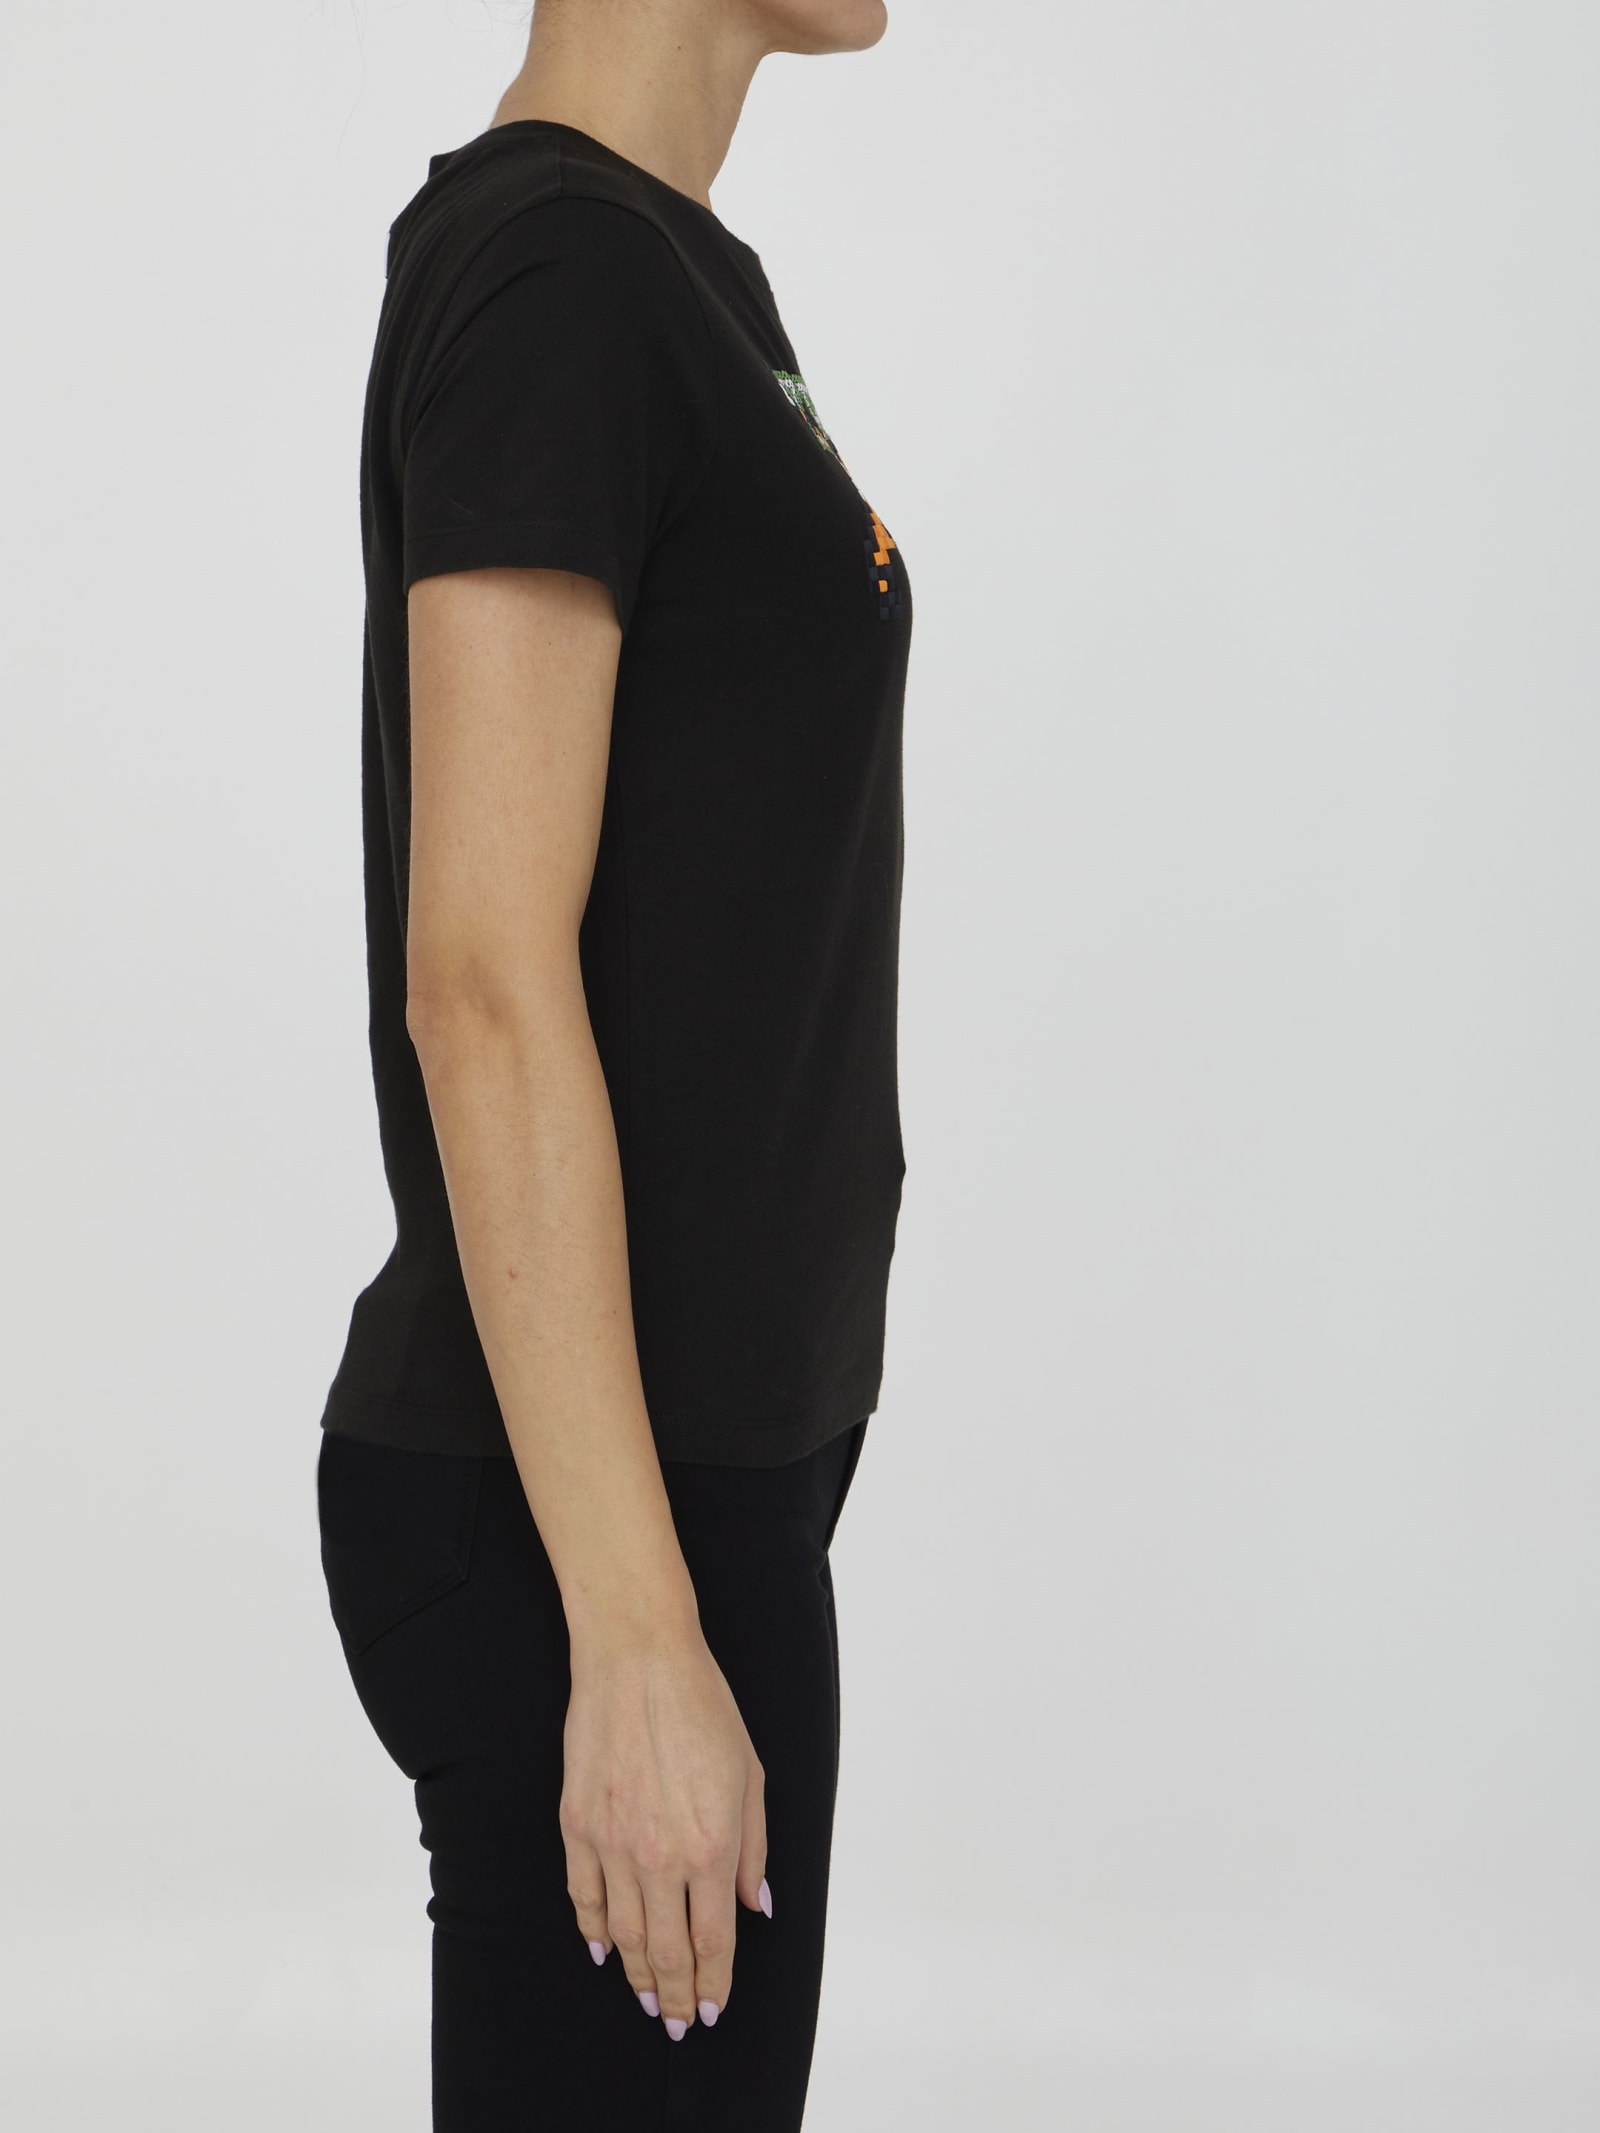 Shop Kenzo Embroidered Black T-shirt